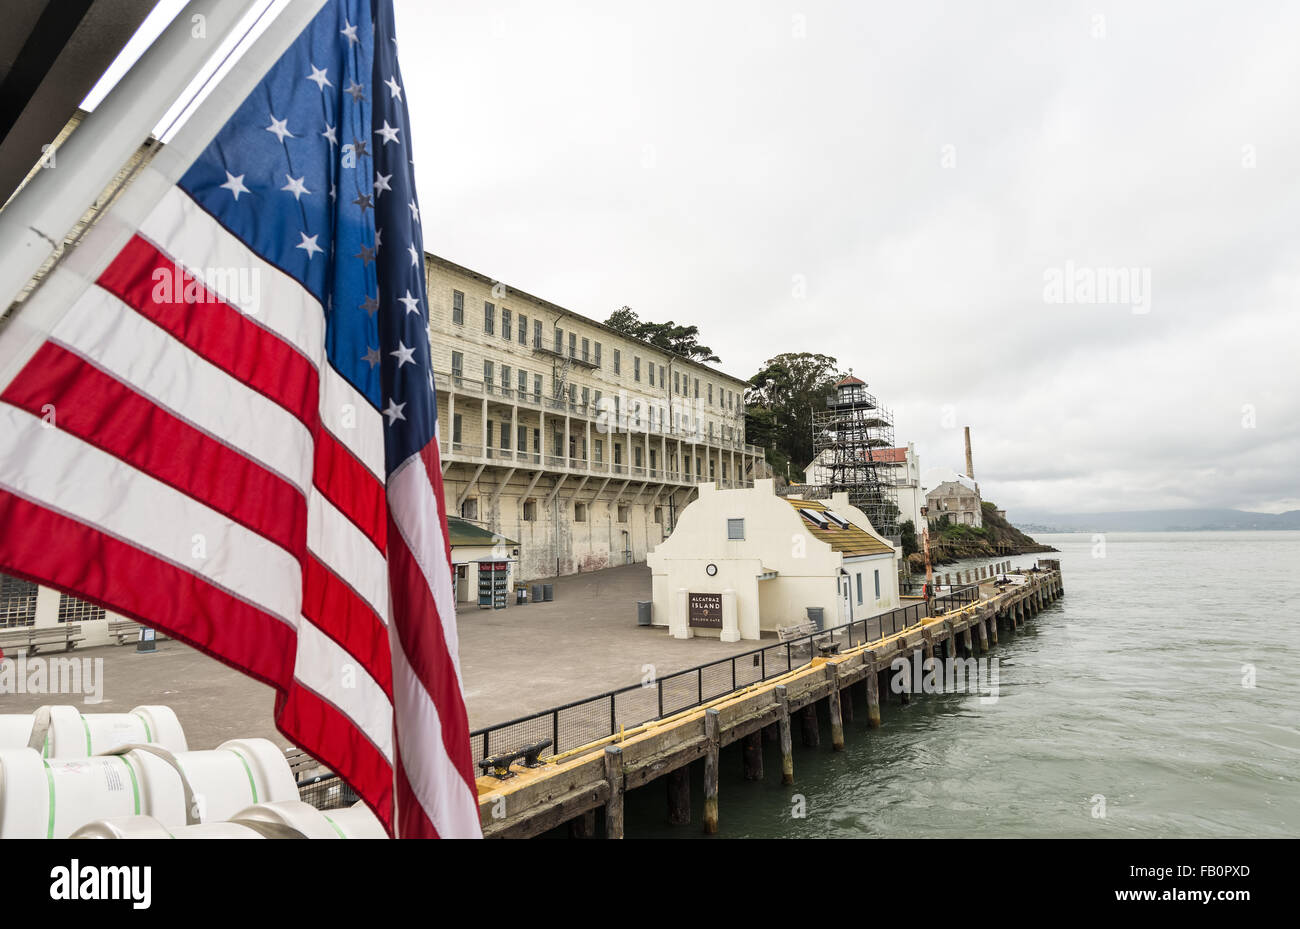 Alcatraz prison and dock with US flag in foreground Stock Photo